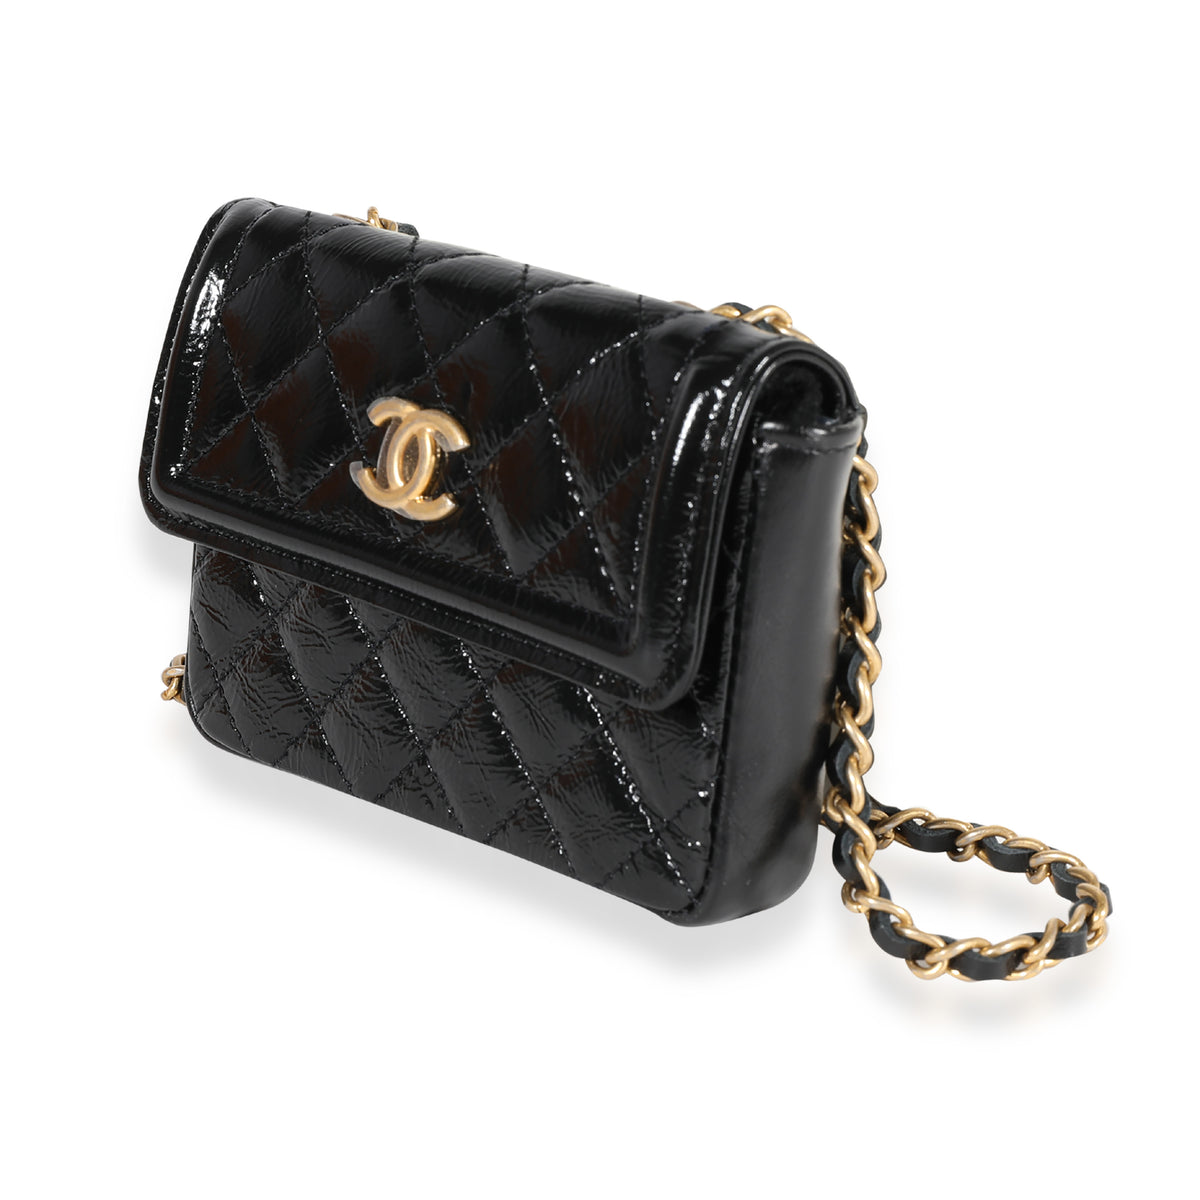 Chanel Black Quilted Patent Leather Mini Belt Bag